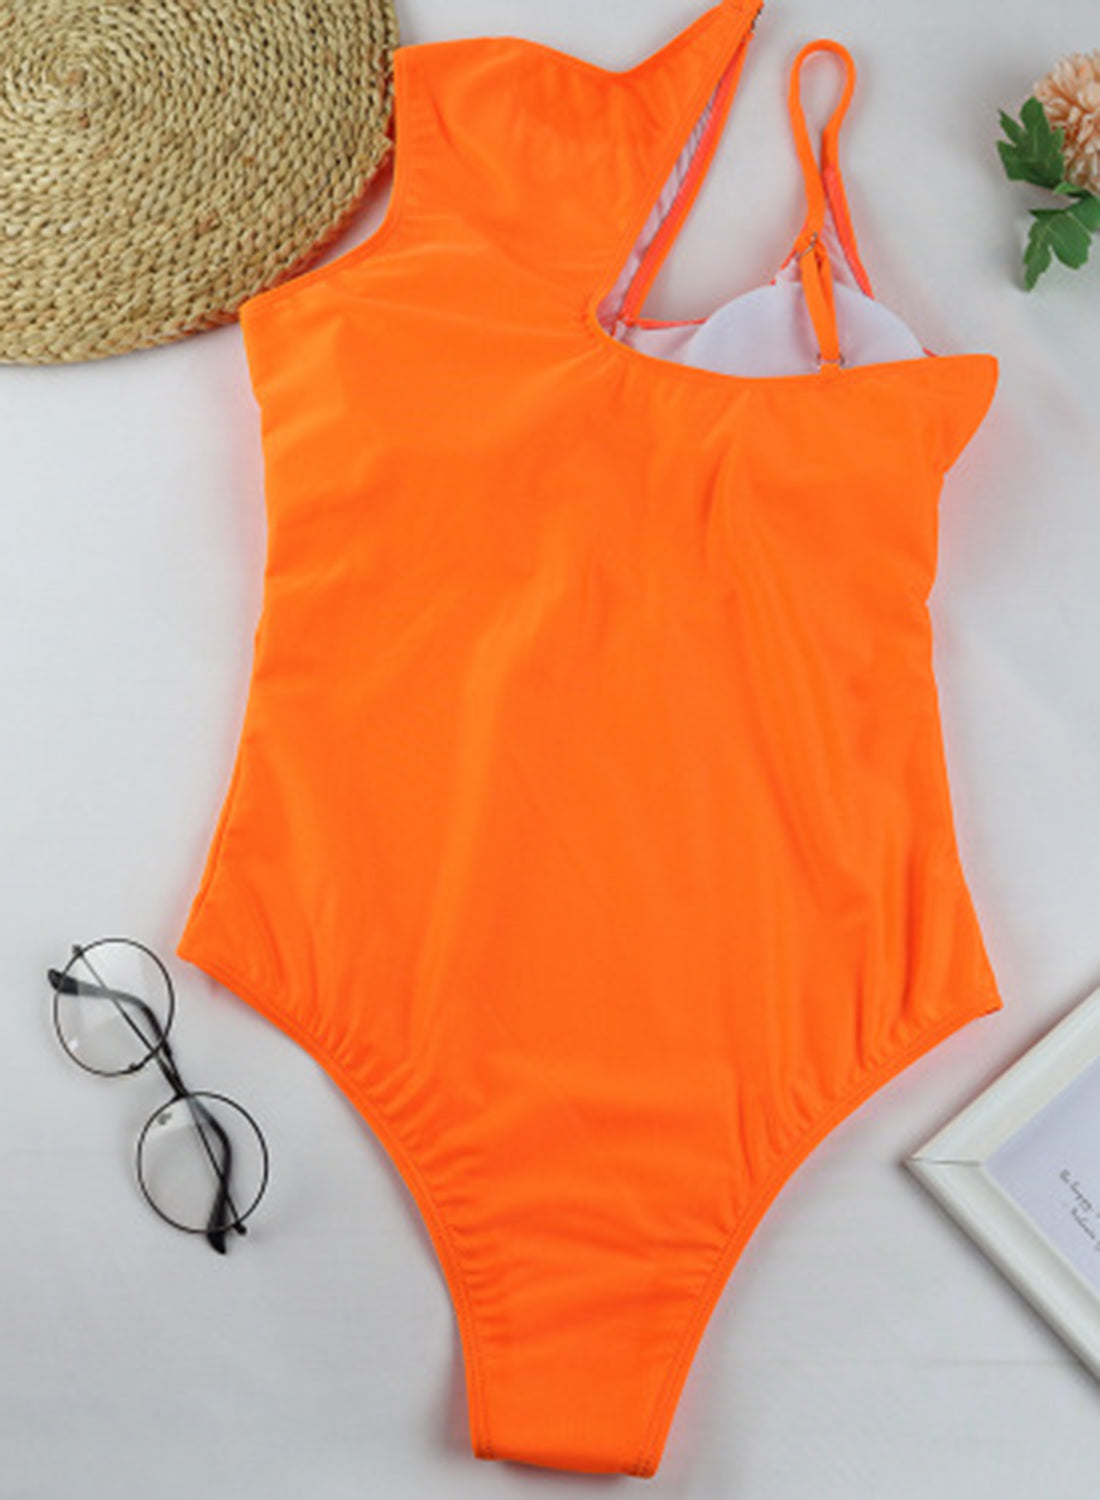 Orange Women's Swimsuits Solid Padded Sleeveless Round Neck Adjustable Wire-free Sexy Summer One-piece Suit LC44784-14